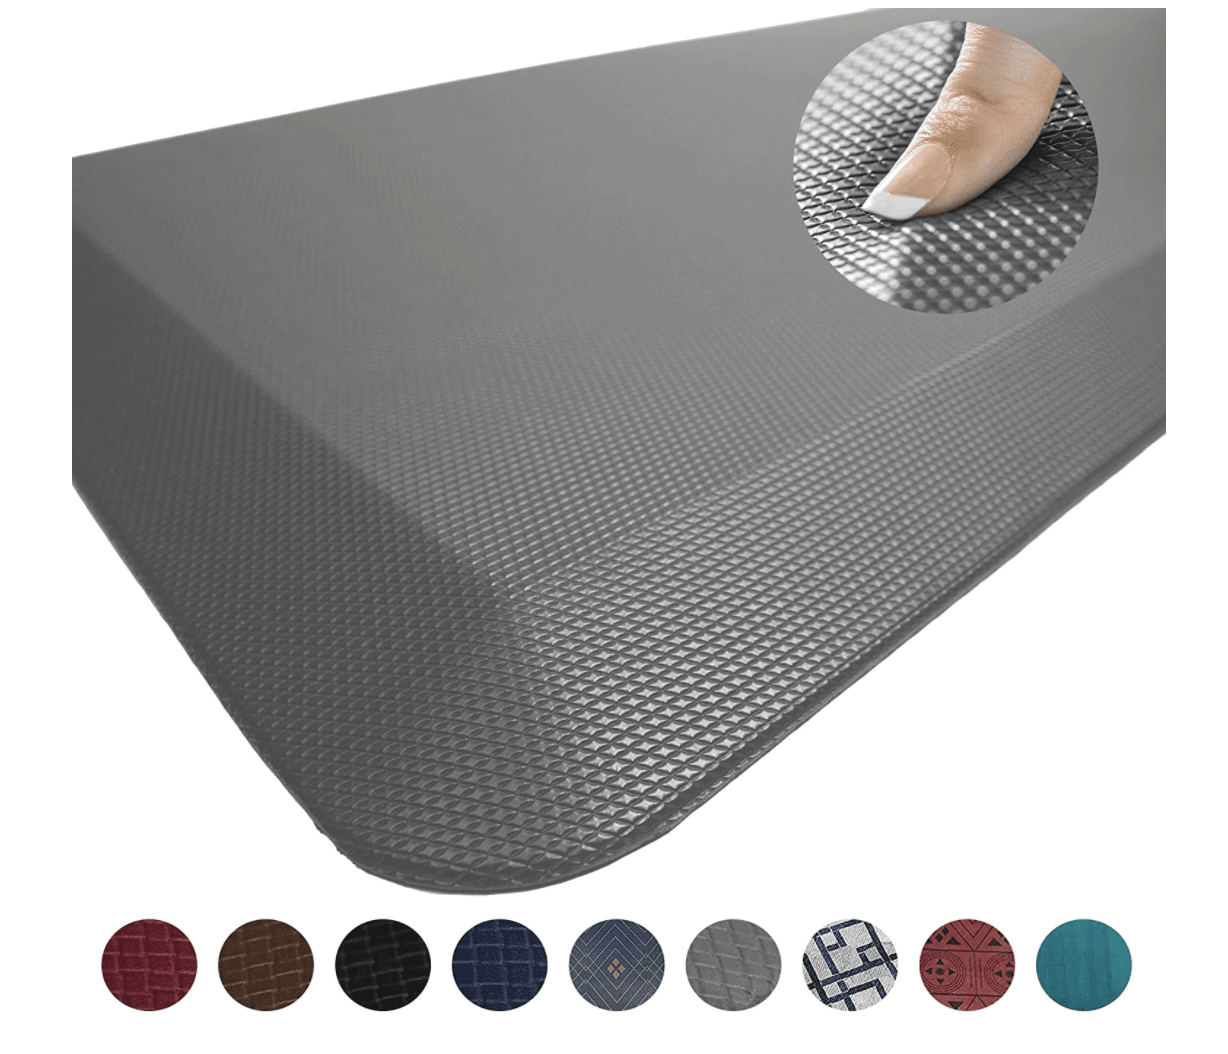 Bring More Comfort to Your Kitchen with These 6 Anti-Fatigue Mats -  LifeSavvy